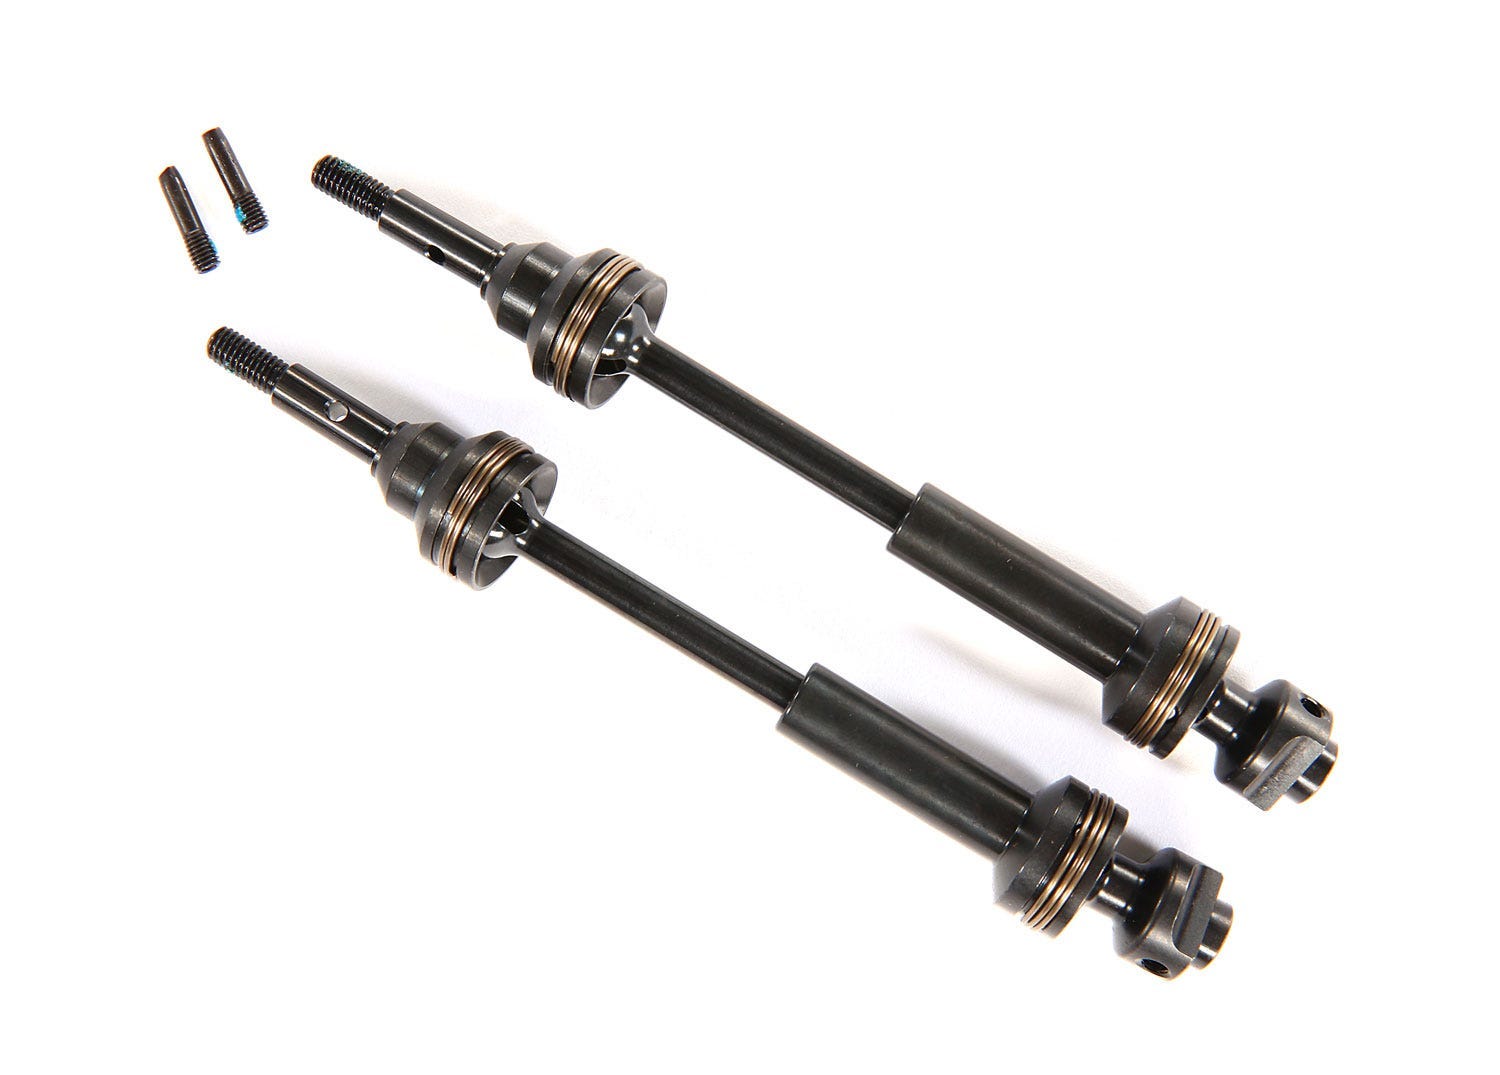 Traxxas Steel-Spline Constant-Velocity Front Driveshafts (2) (Complete Assembly)